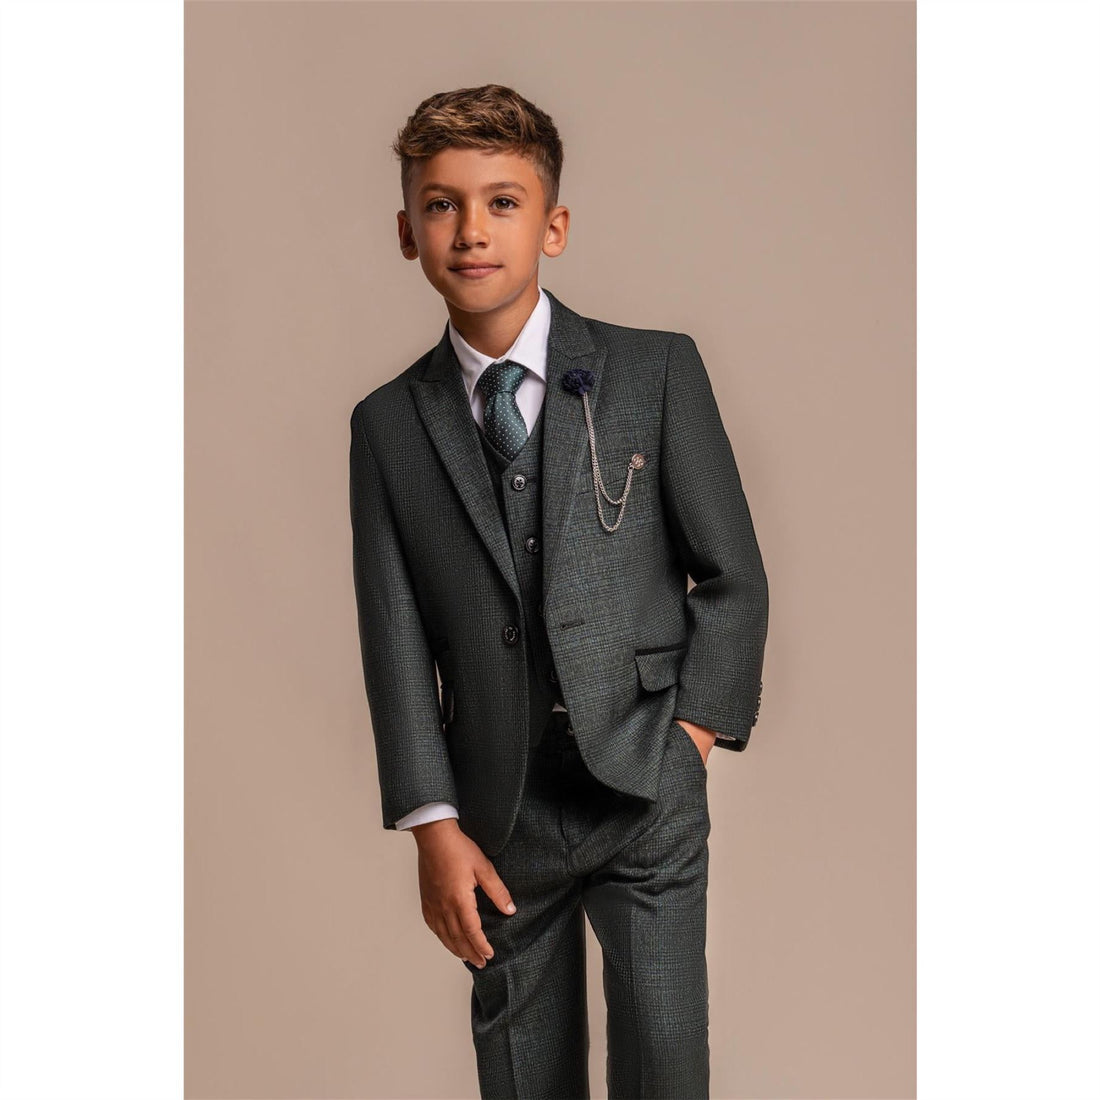 Boys 3 Piece Olive Green Check Suit Tweed Tailored Fit Wedding